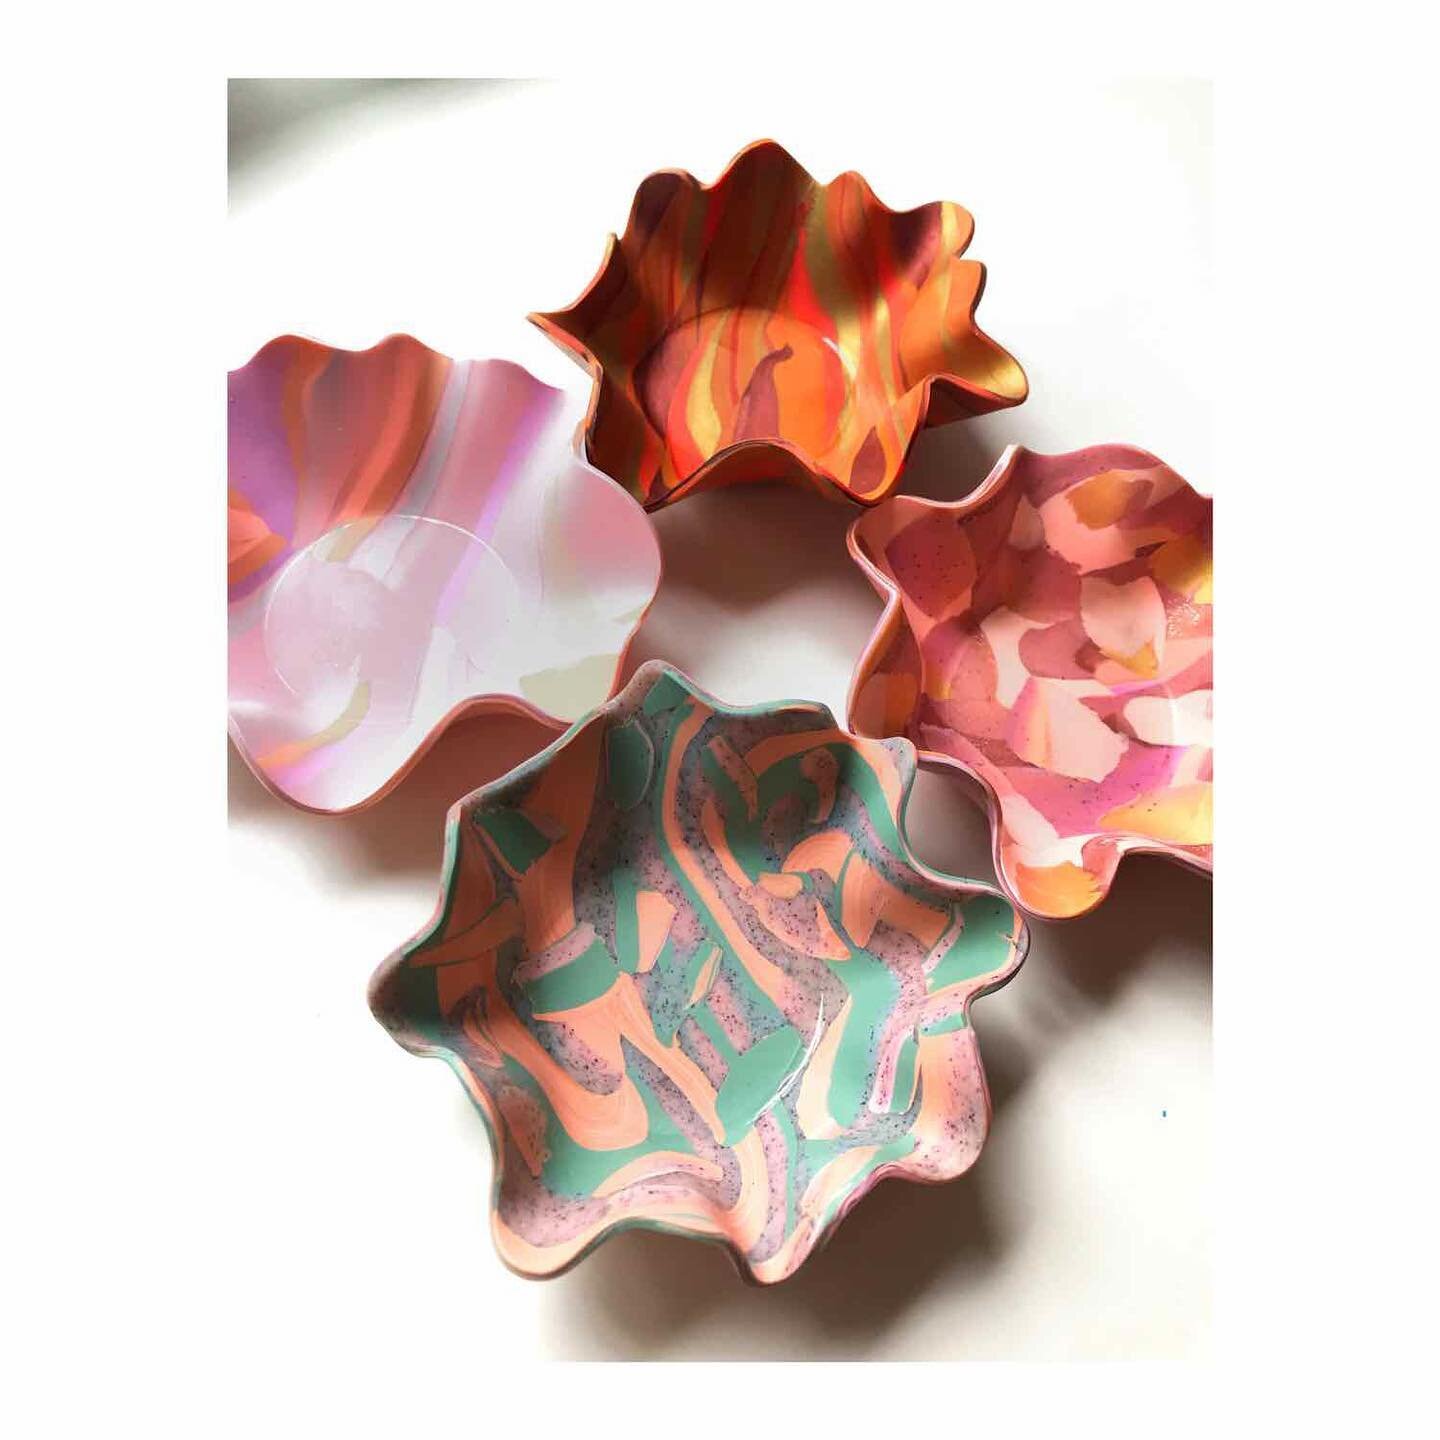 If you leave your jewelry all around your house then these new fluted trinket dishes are for you. Leave one on your nightstand, next to the sink, coffee table, on your desk. Find them on my website later this week! Have a specific color request? Shoo